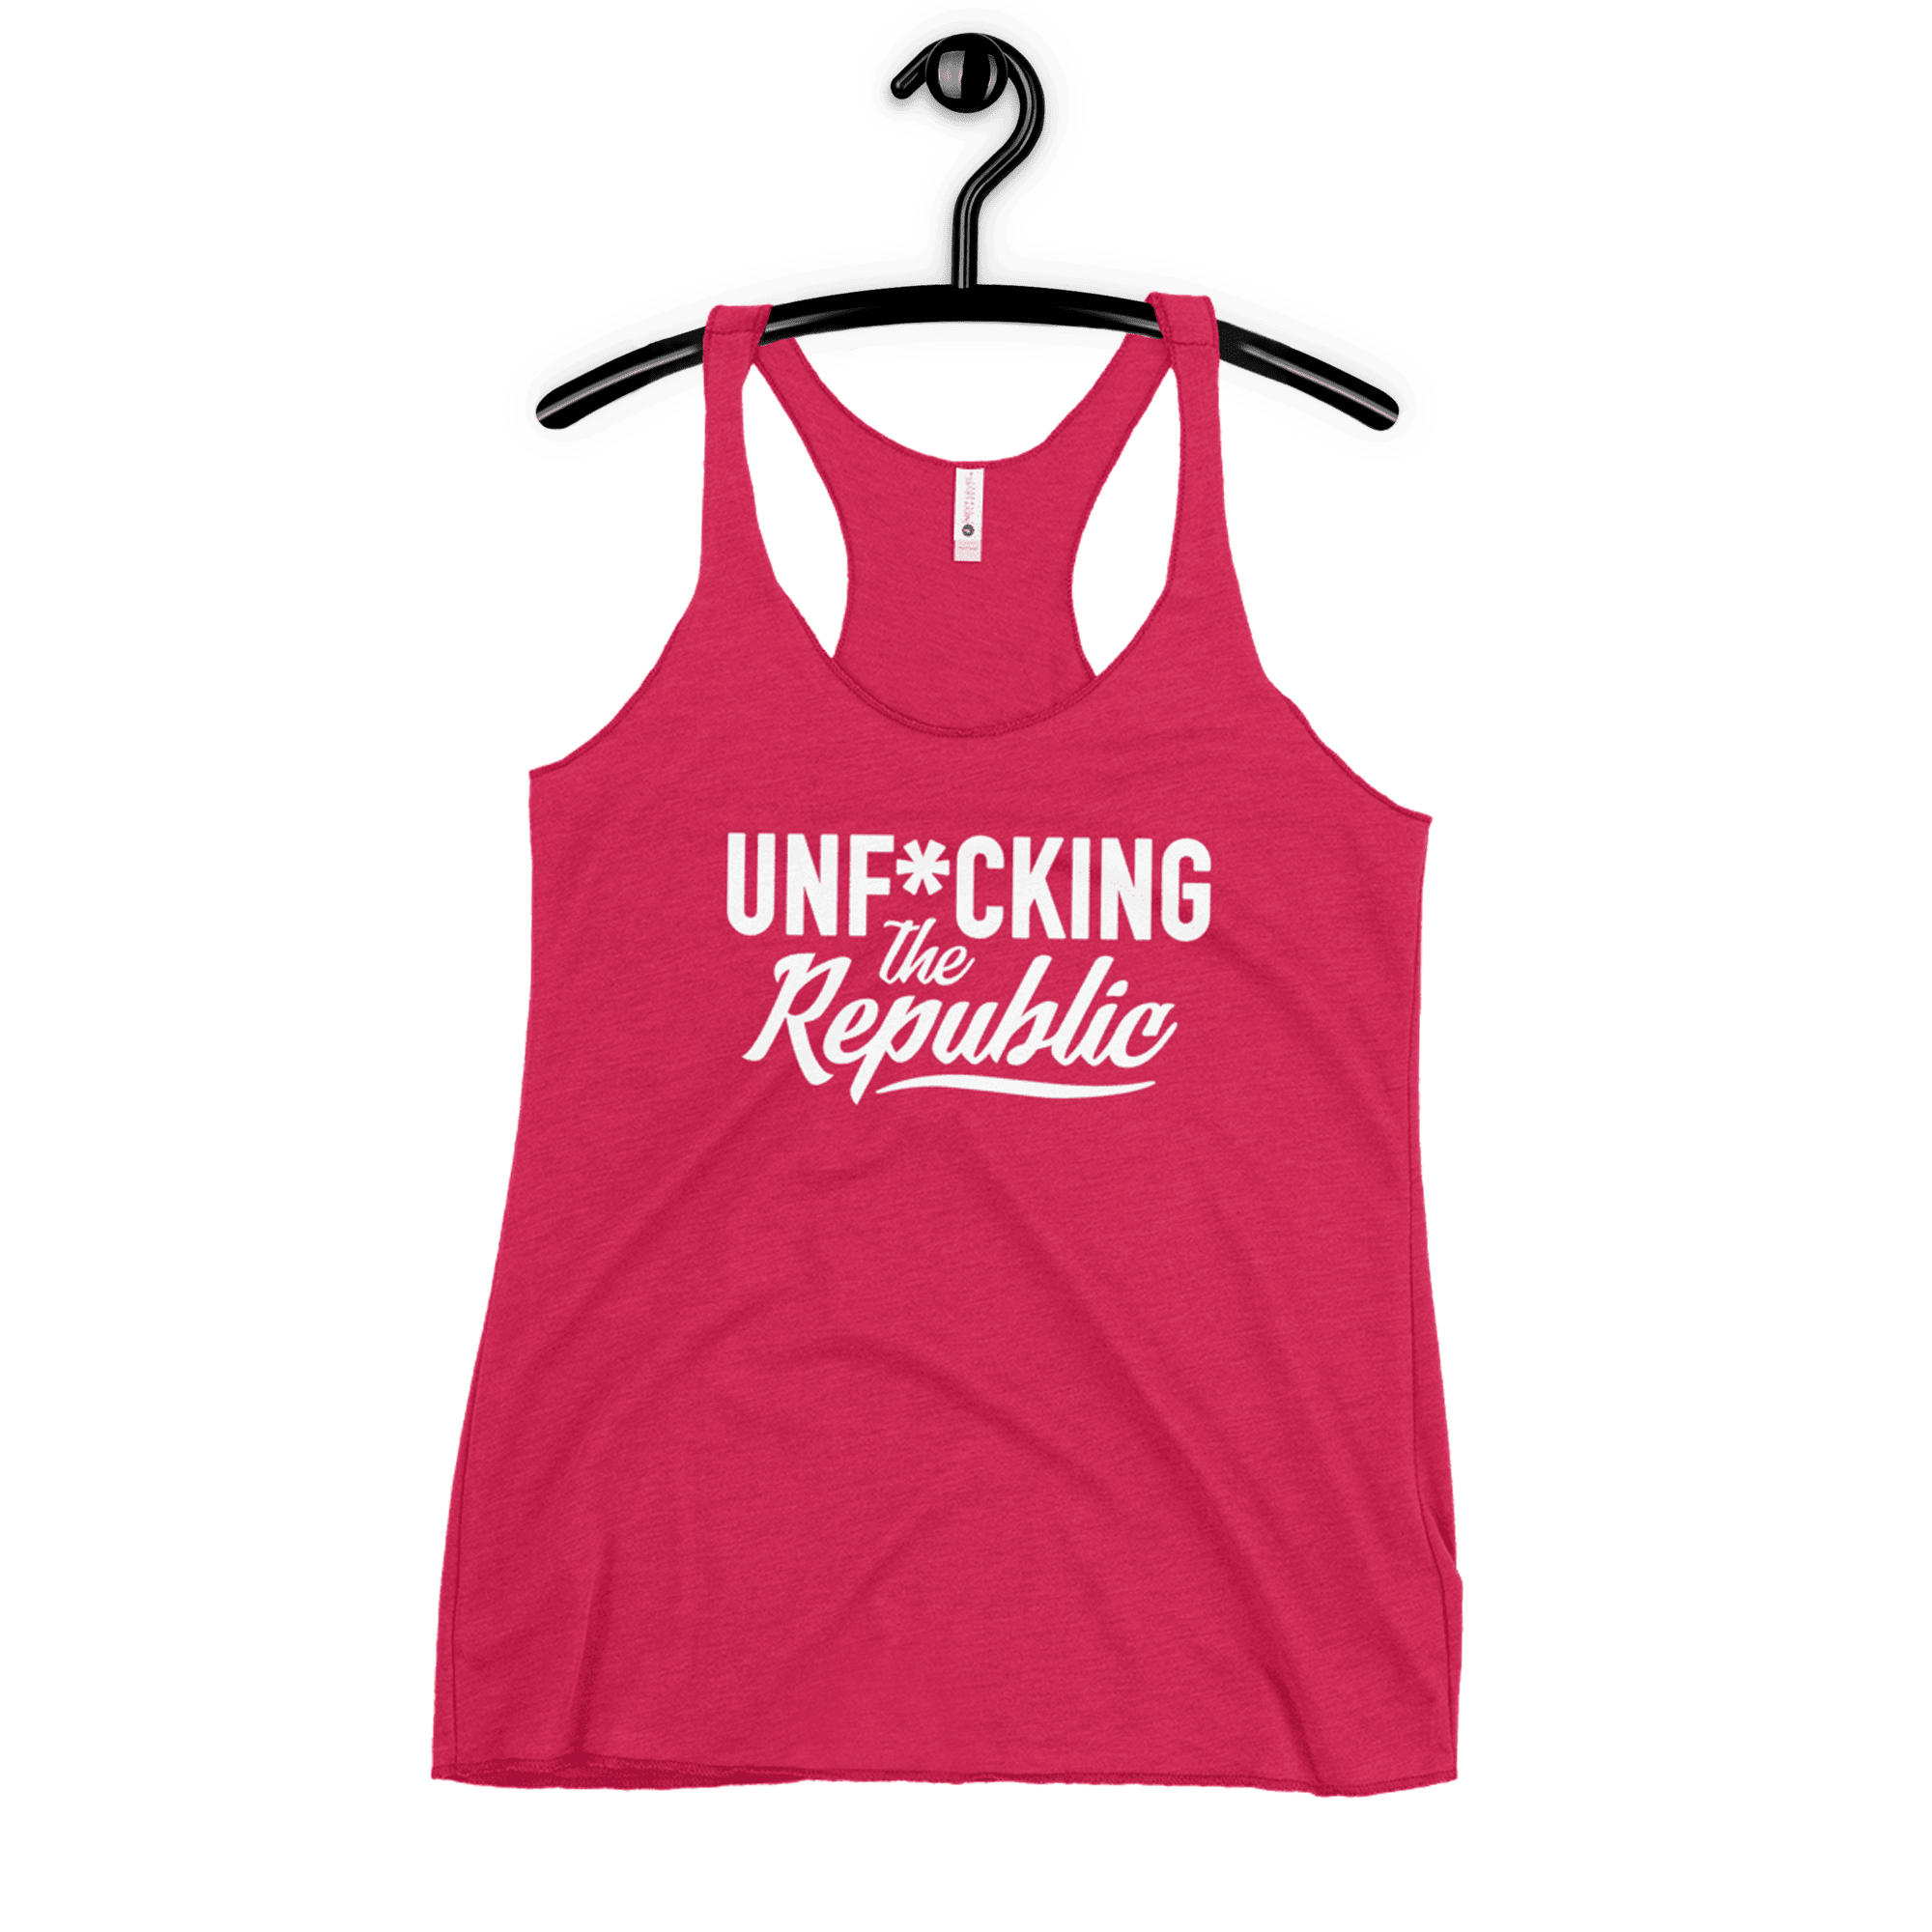 Fitted Tank top in bright pink with White Unf_cking The Republic logo on the chest (1)